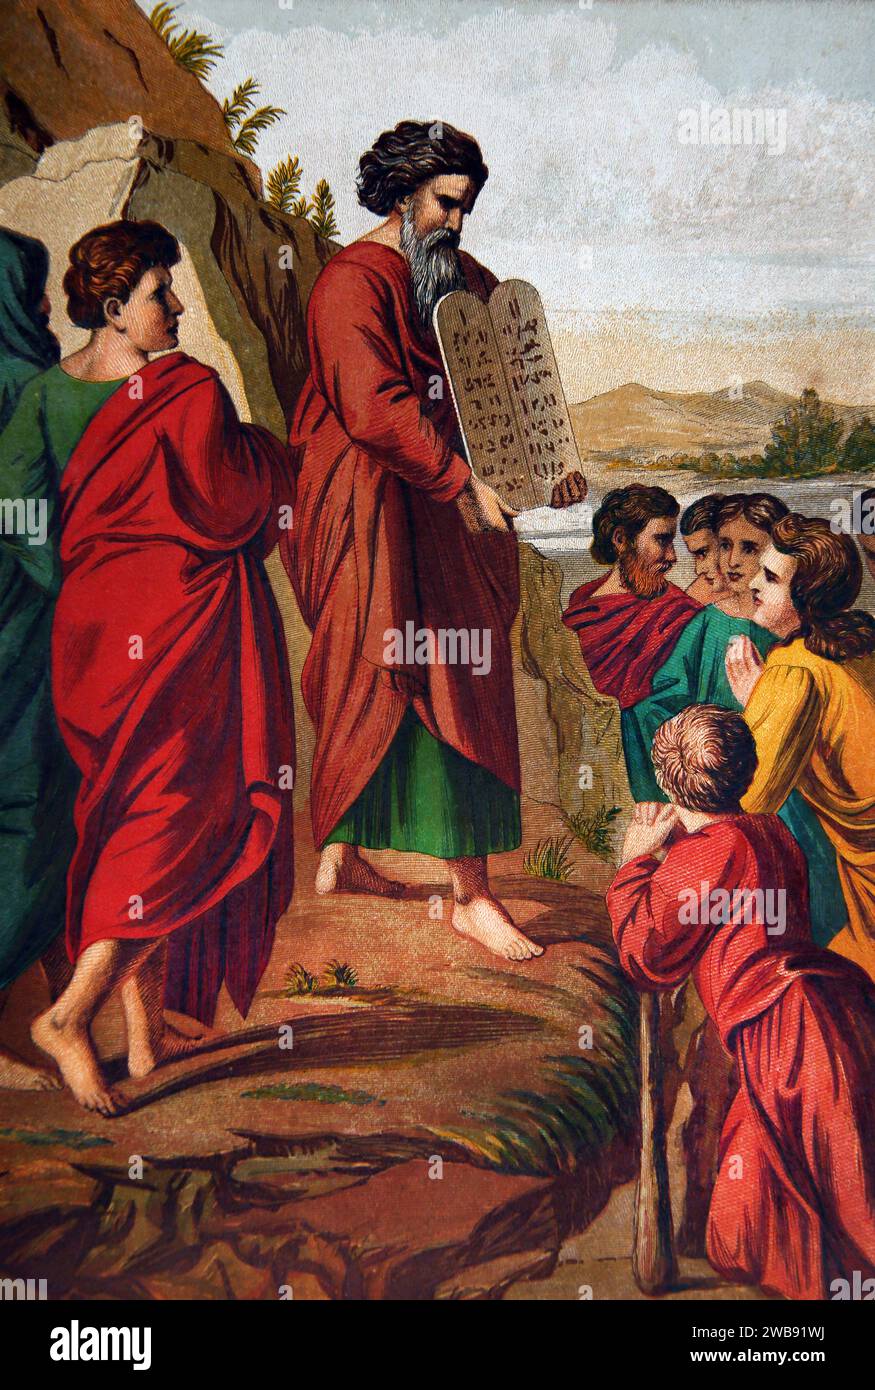 Illustration of Moses Descending Mount Sinai holding the Tablets of the Covenant (Exodus) from Antique Illustrated Family Bible Stock Photo